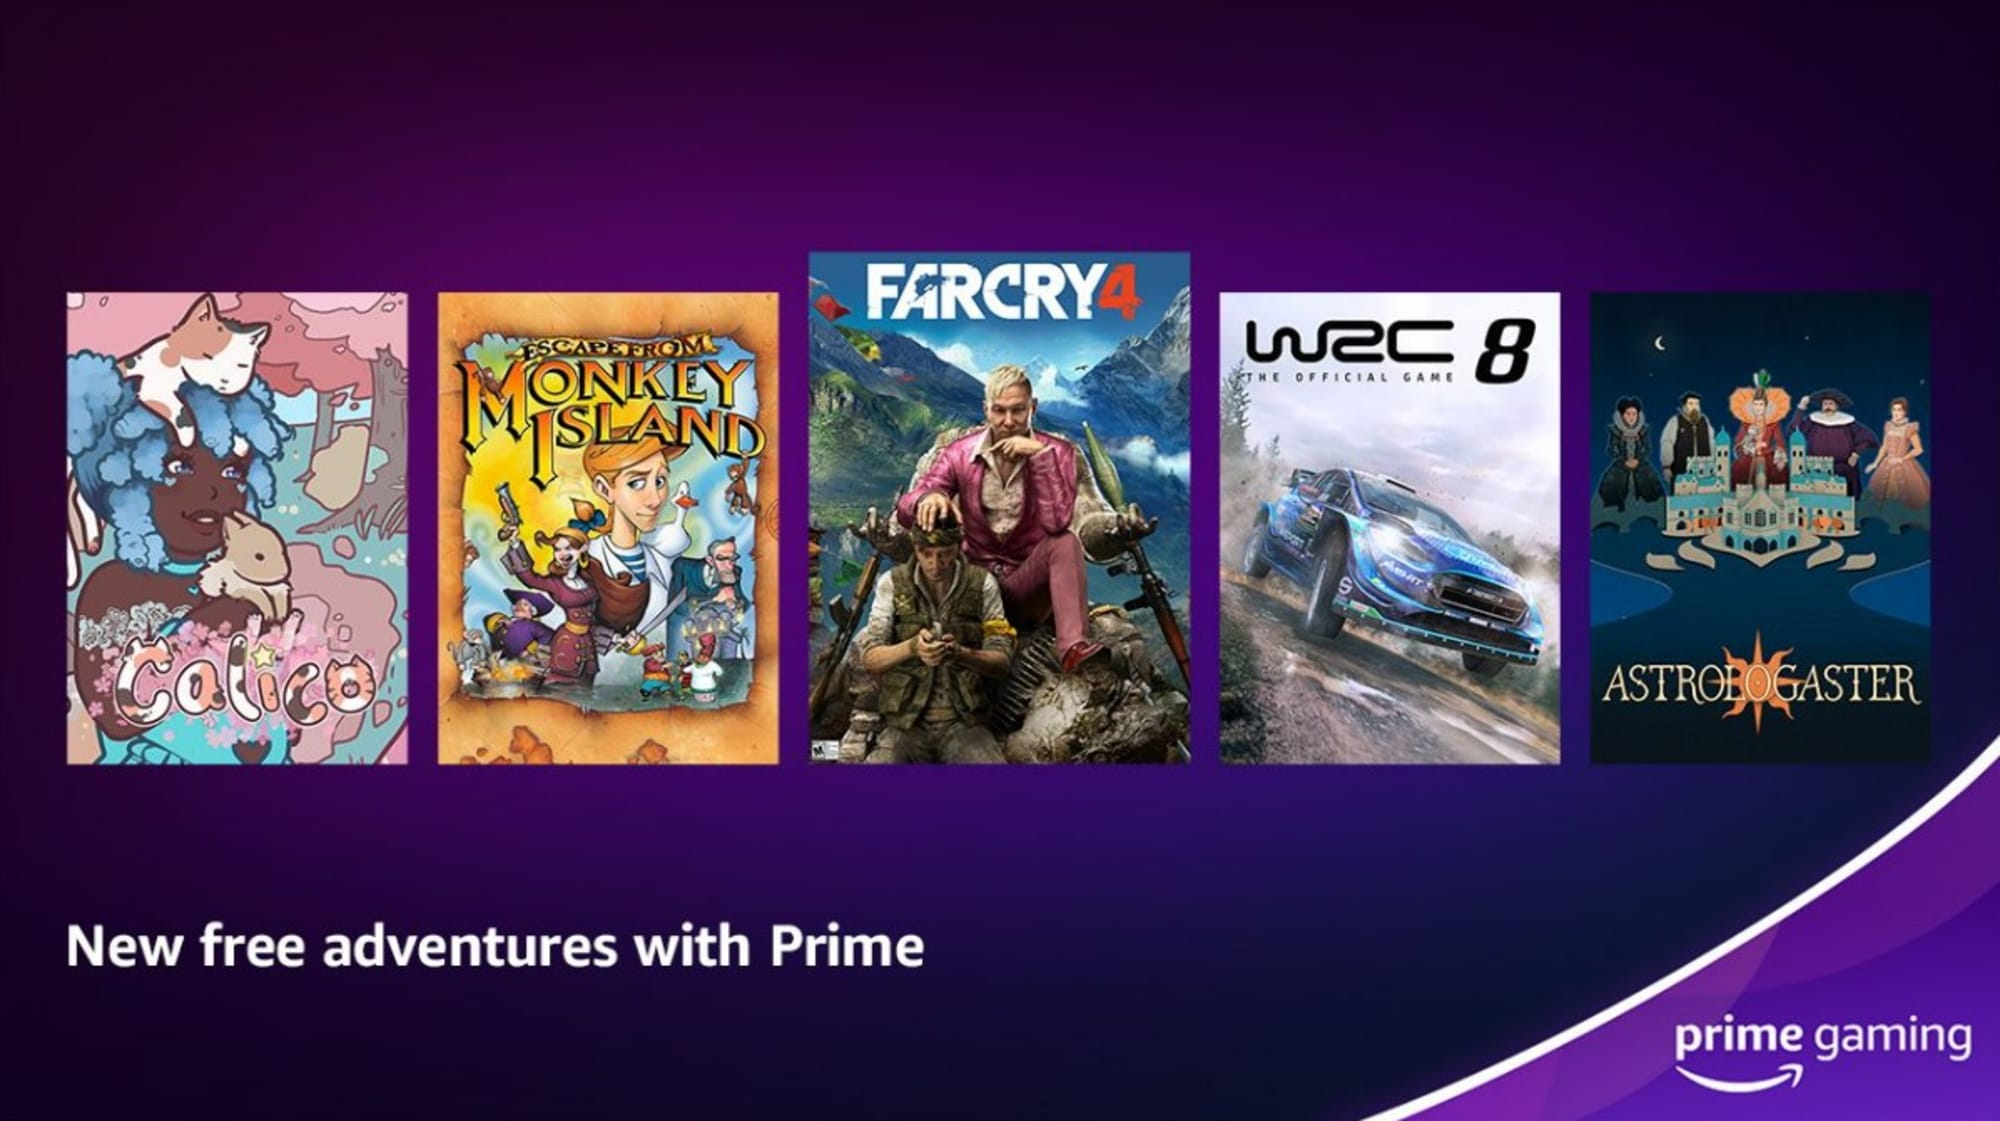 Prime Gaming Reveals February 2022 Offerings